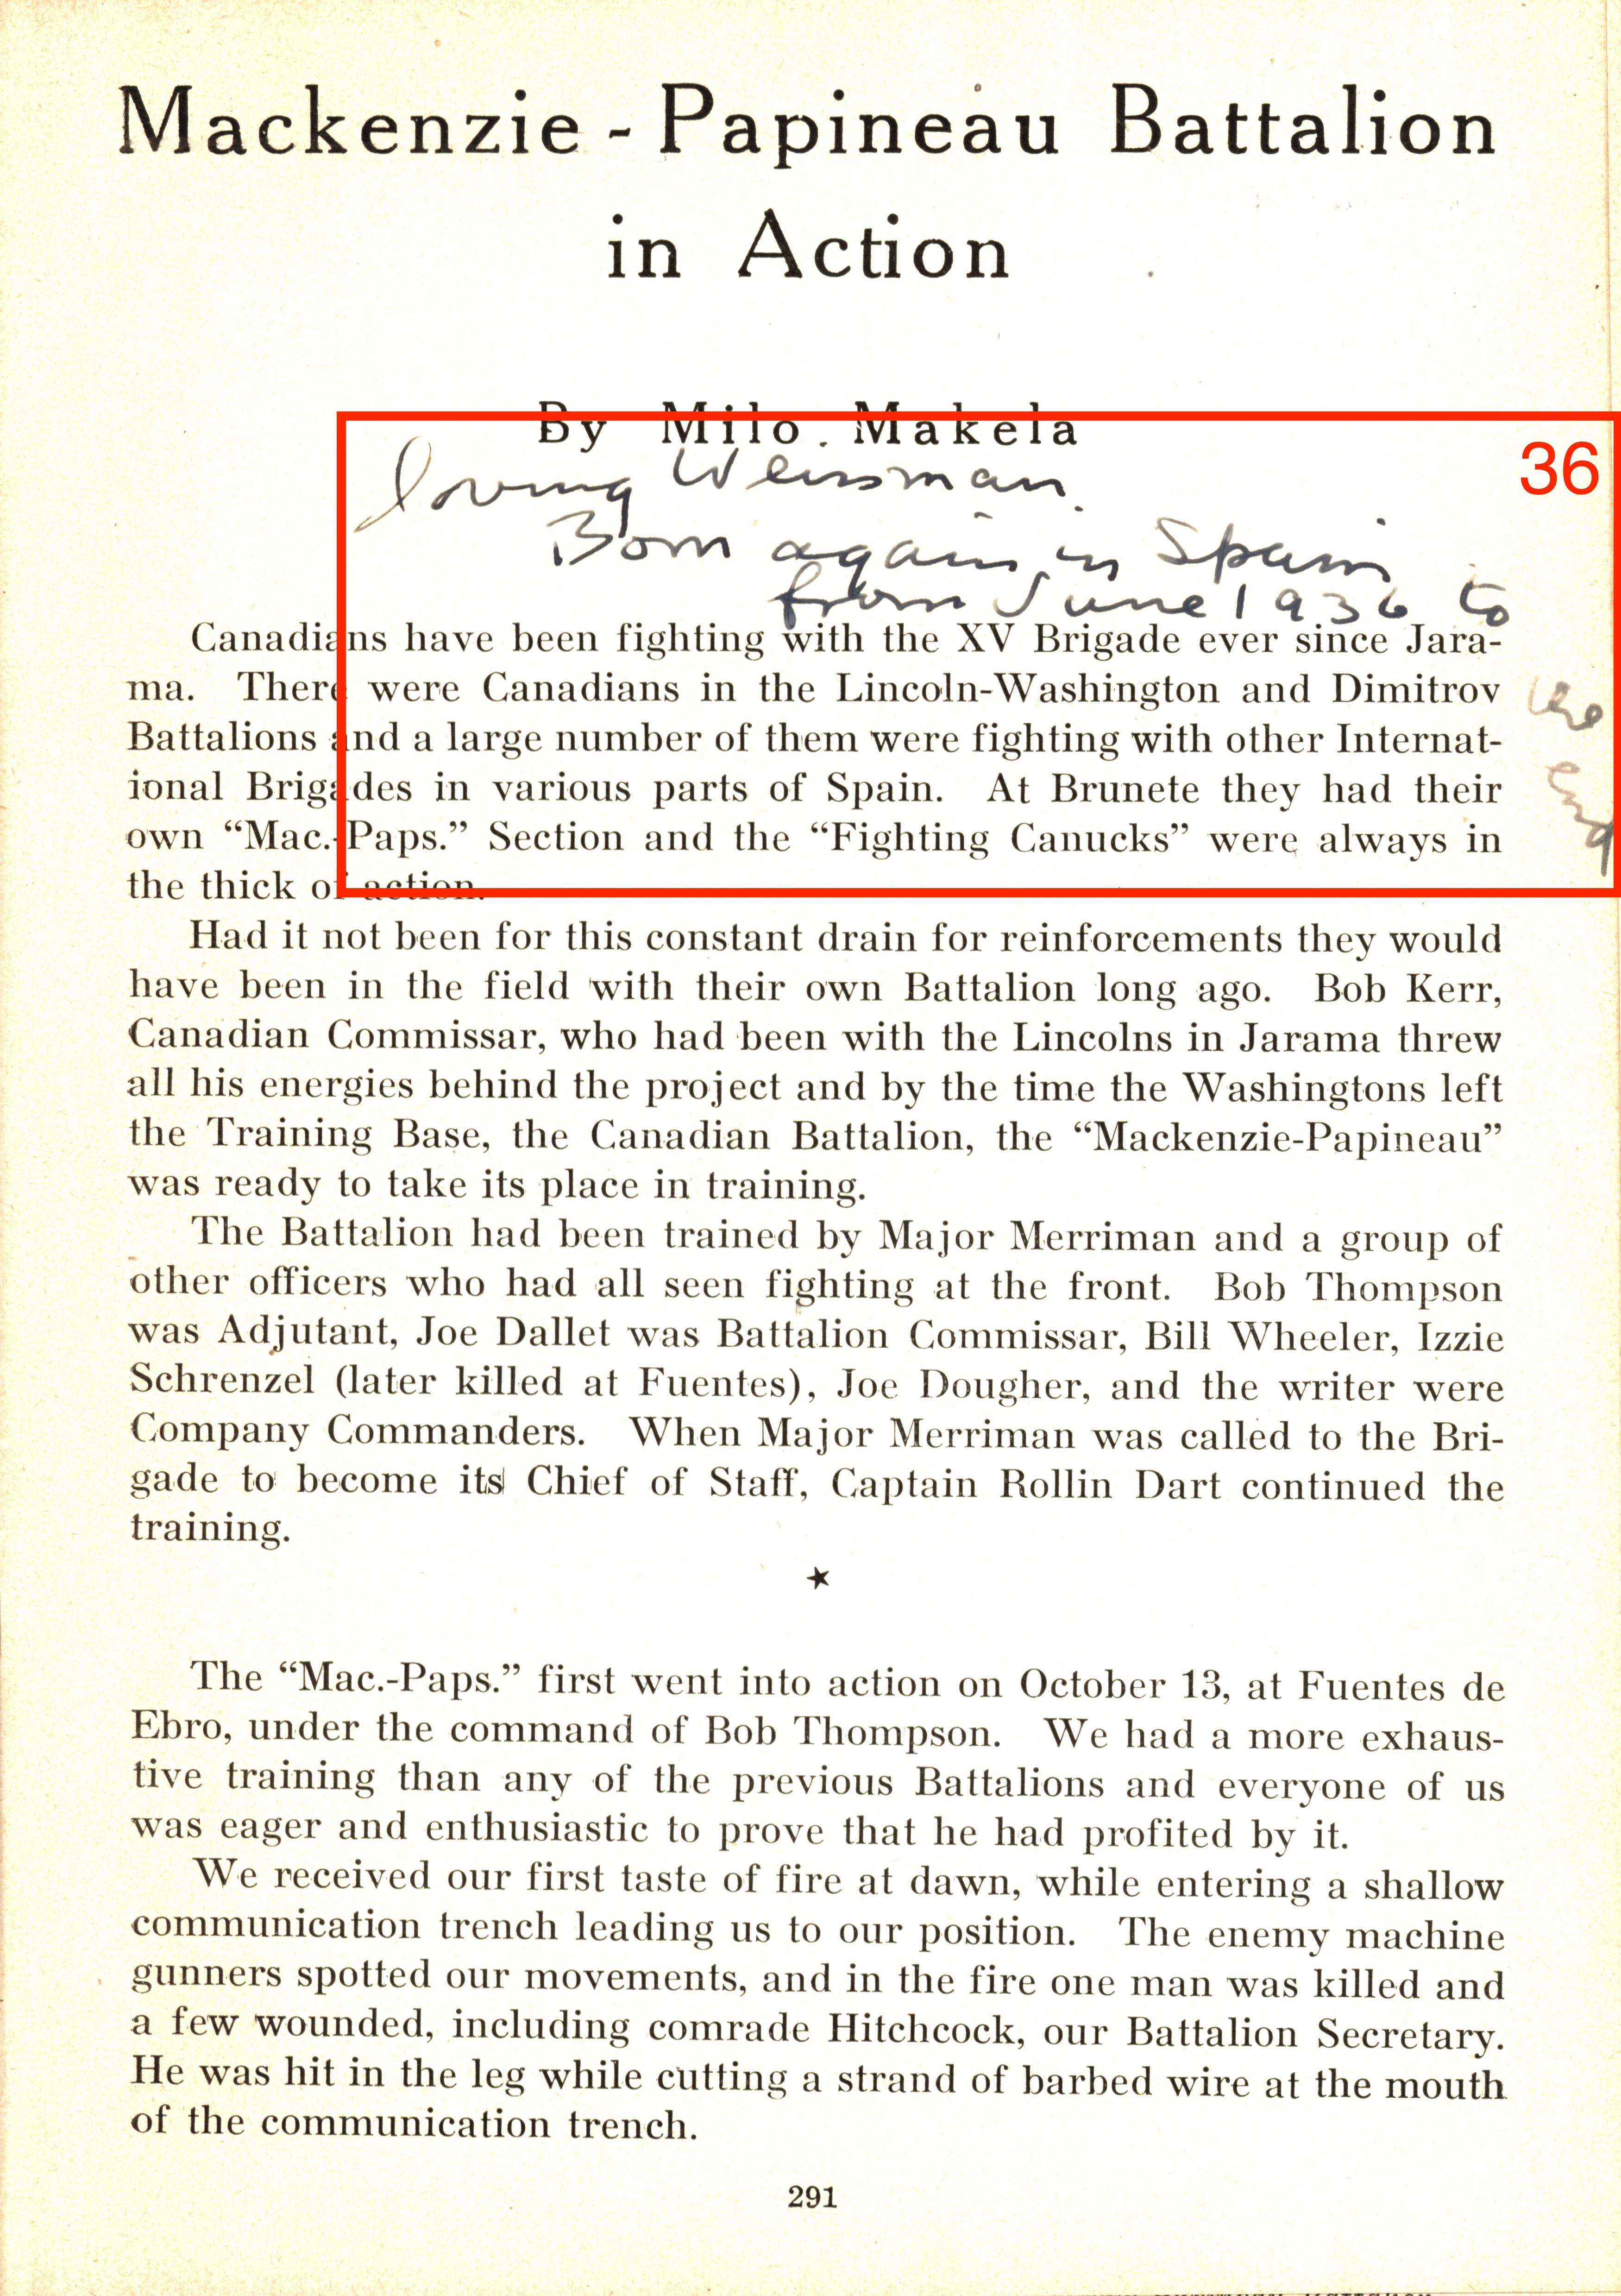 Page 291, titled "Mackenzie Papineau Battalion in Action," with signatures circled